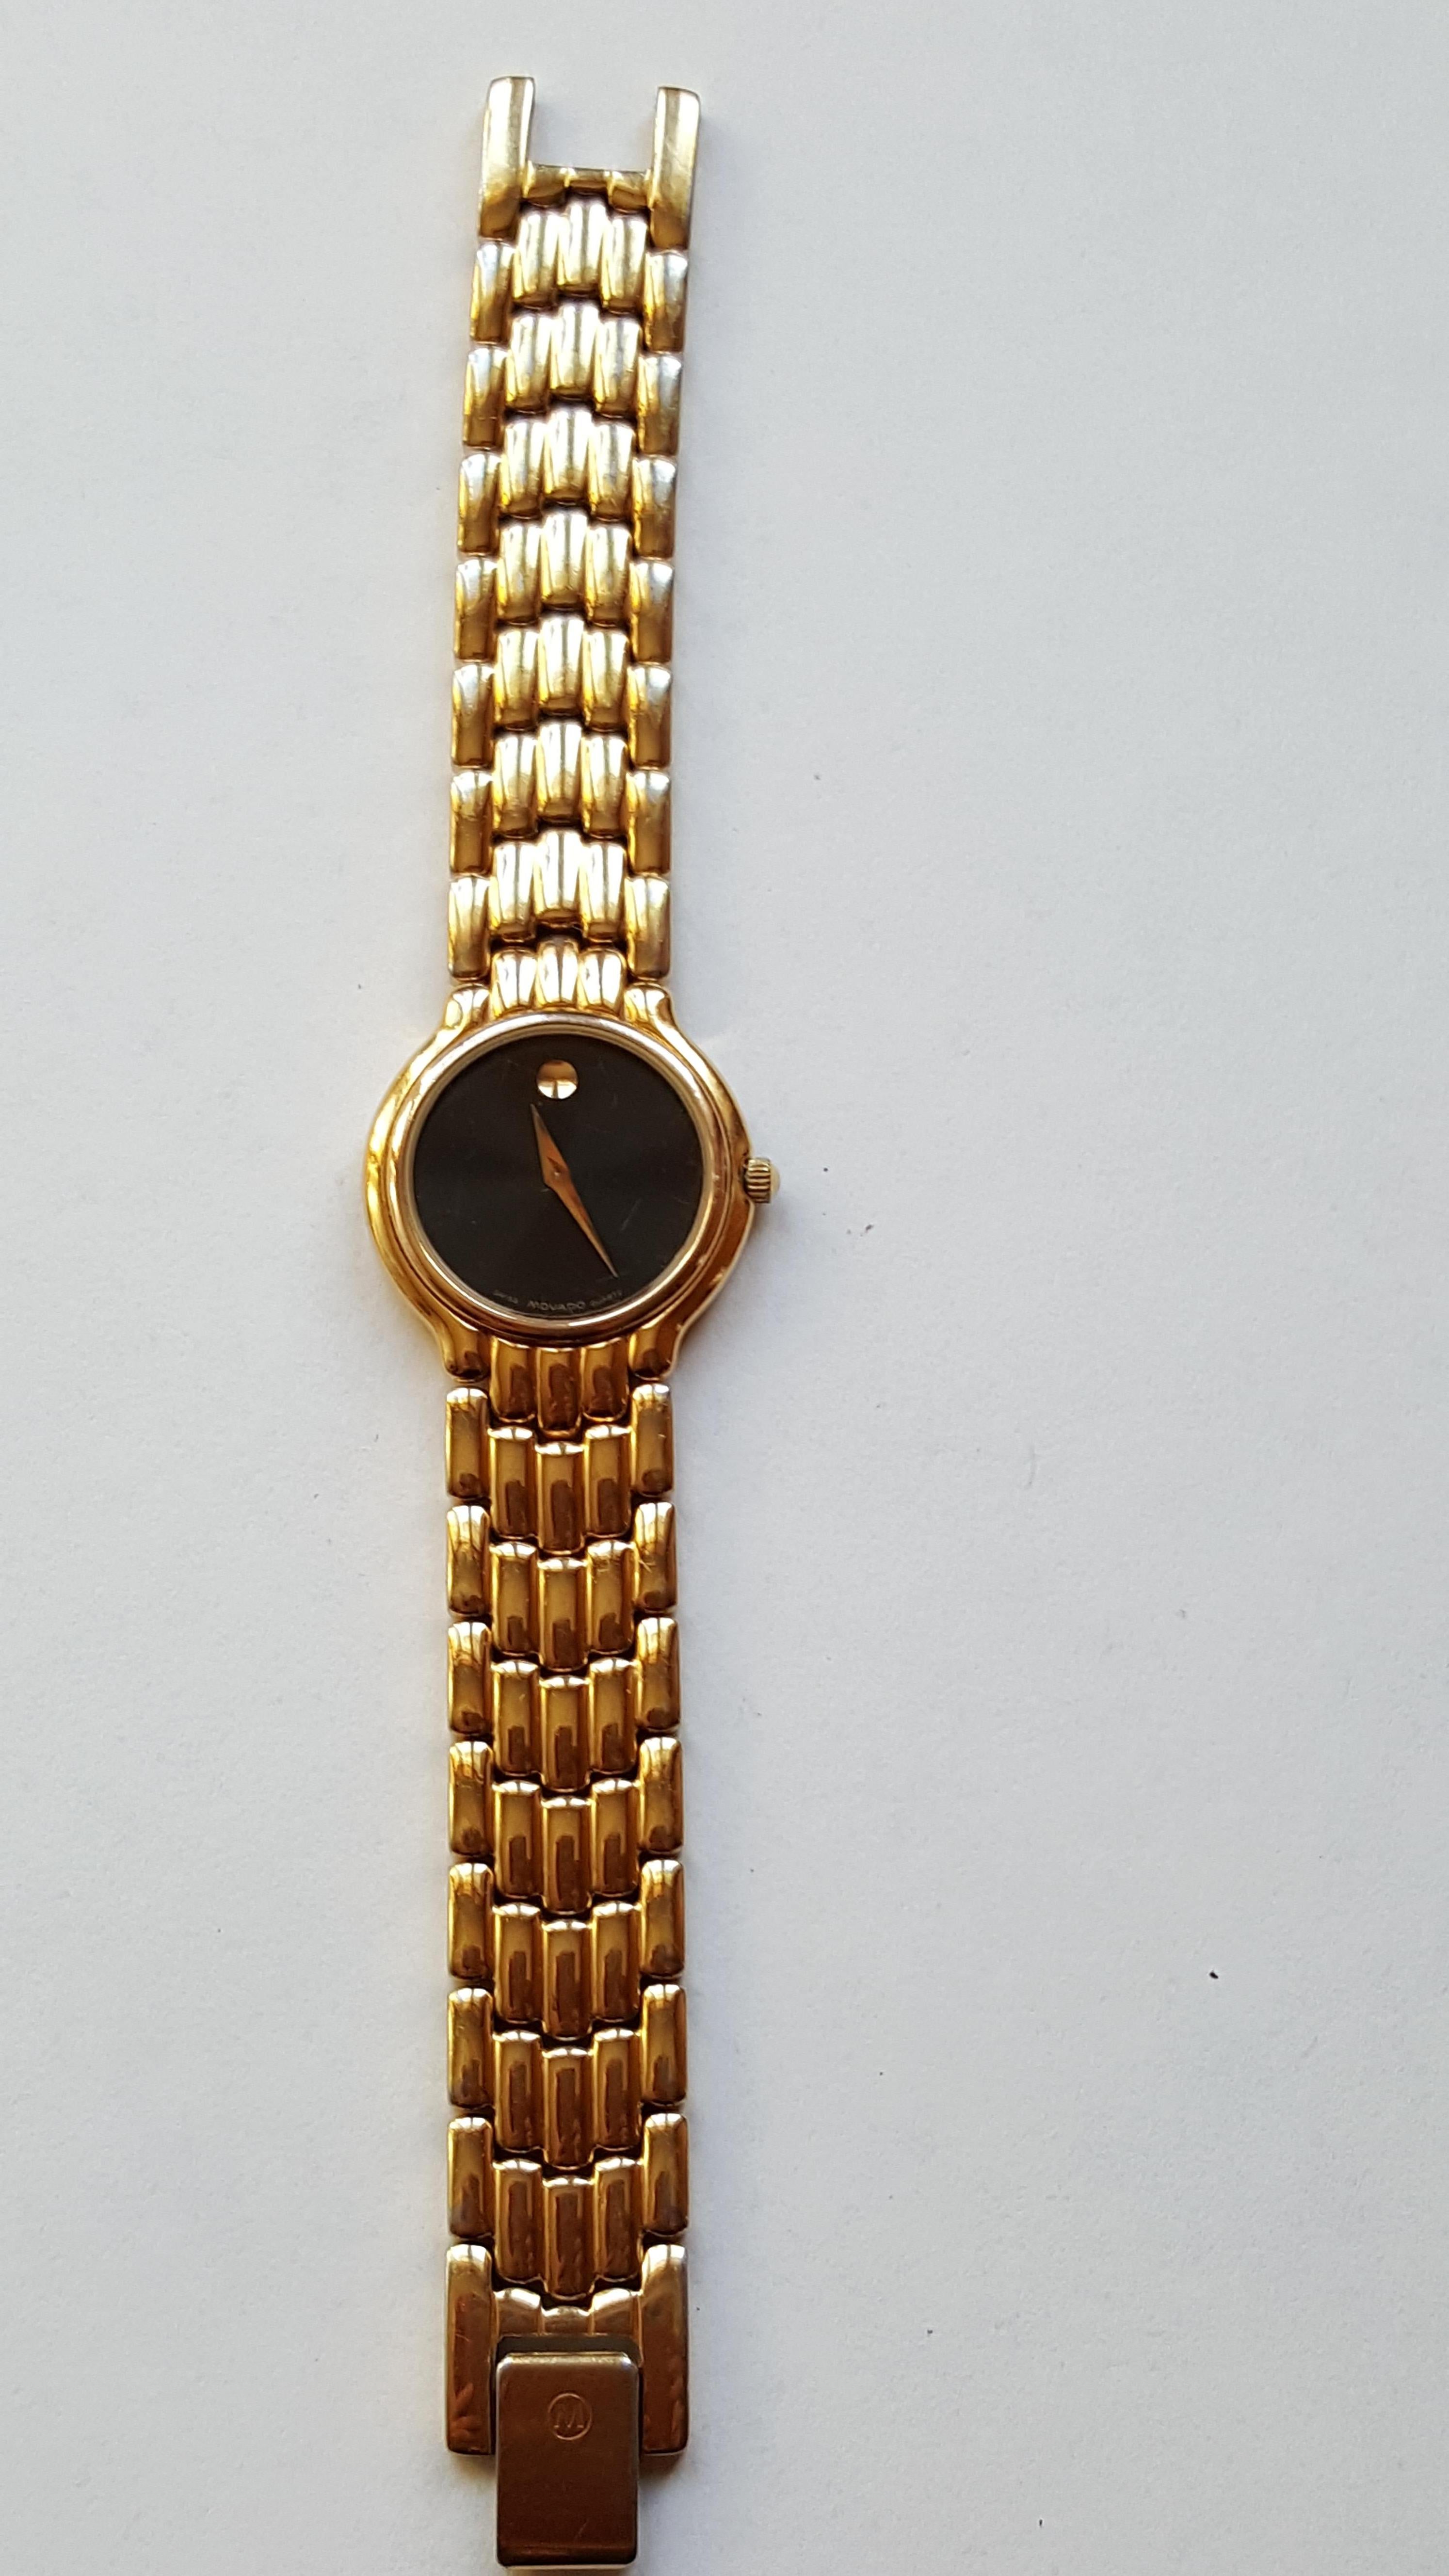 Pre-owned Watch 24mm Case Black Face Movado Museum, Ladies Water Resistant, Quartz, Gold Plated and Stainless Steel 6 Inch Length. This watch is sold as is, before shipping we'll put a new battery in the watch.

This watch has not been serviced with